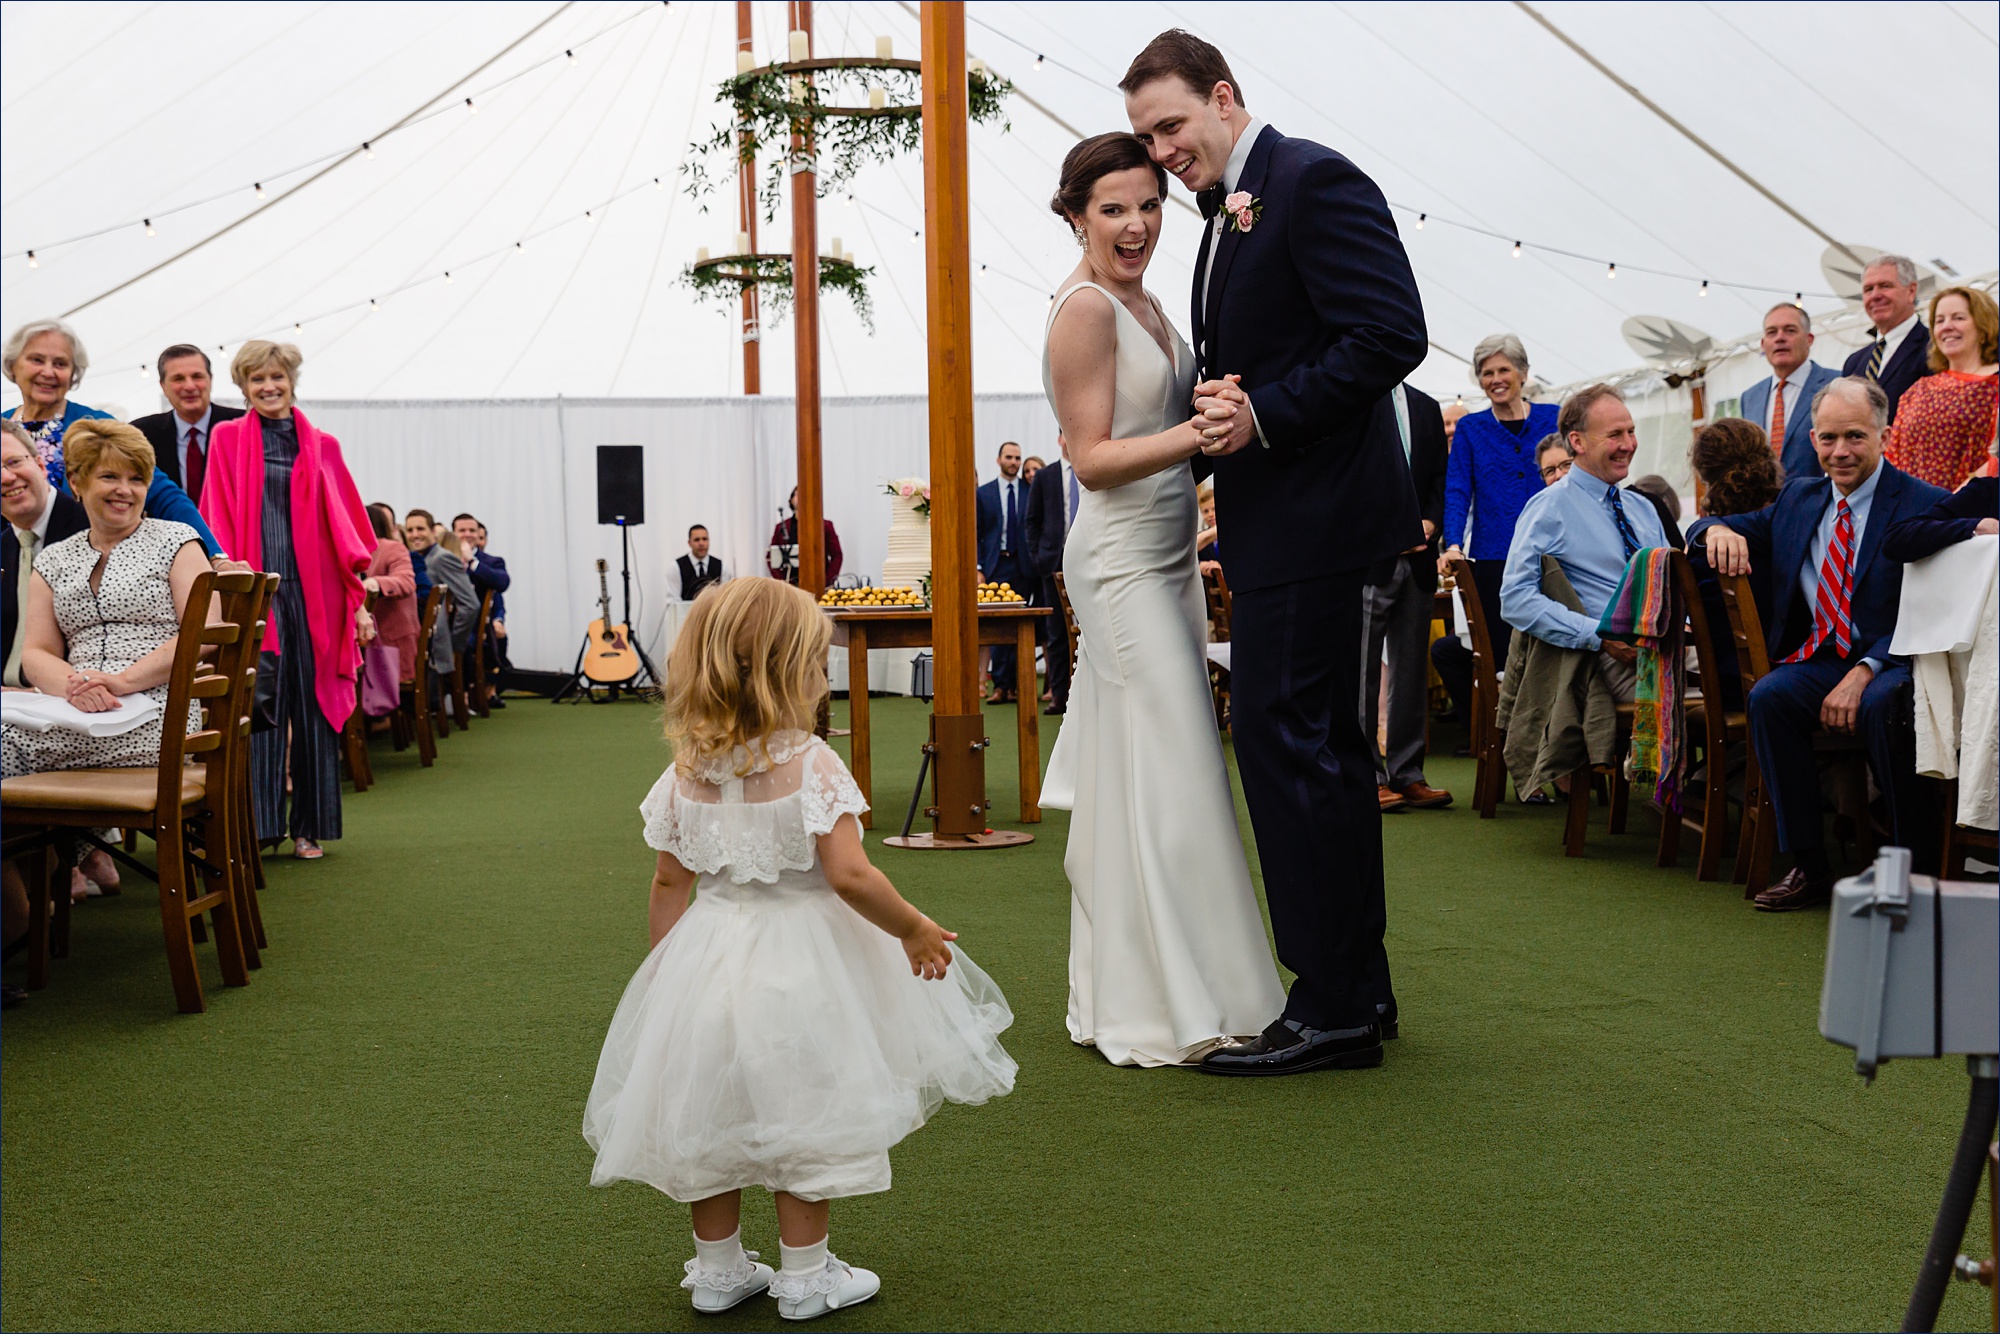 The flower girl wants to join the first dance with the bride and groom at Hardy Farm